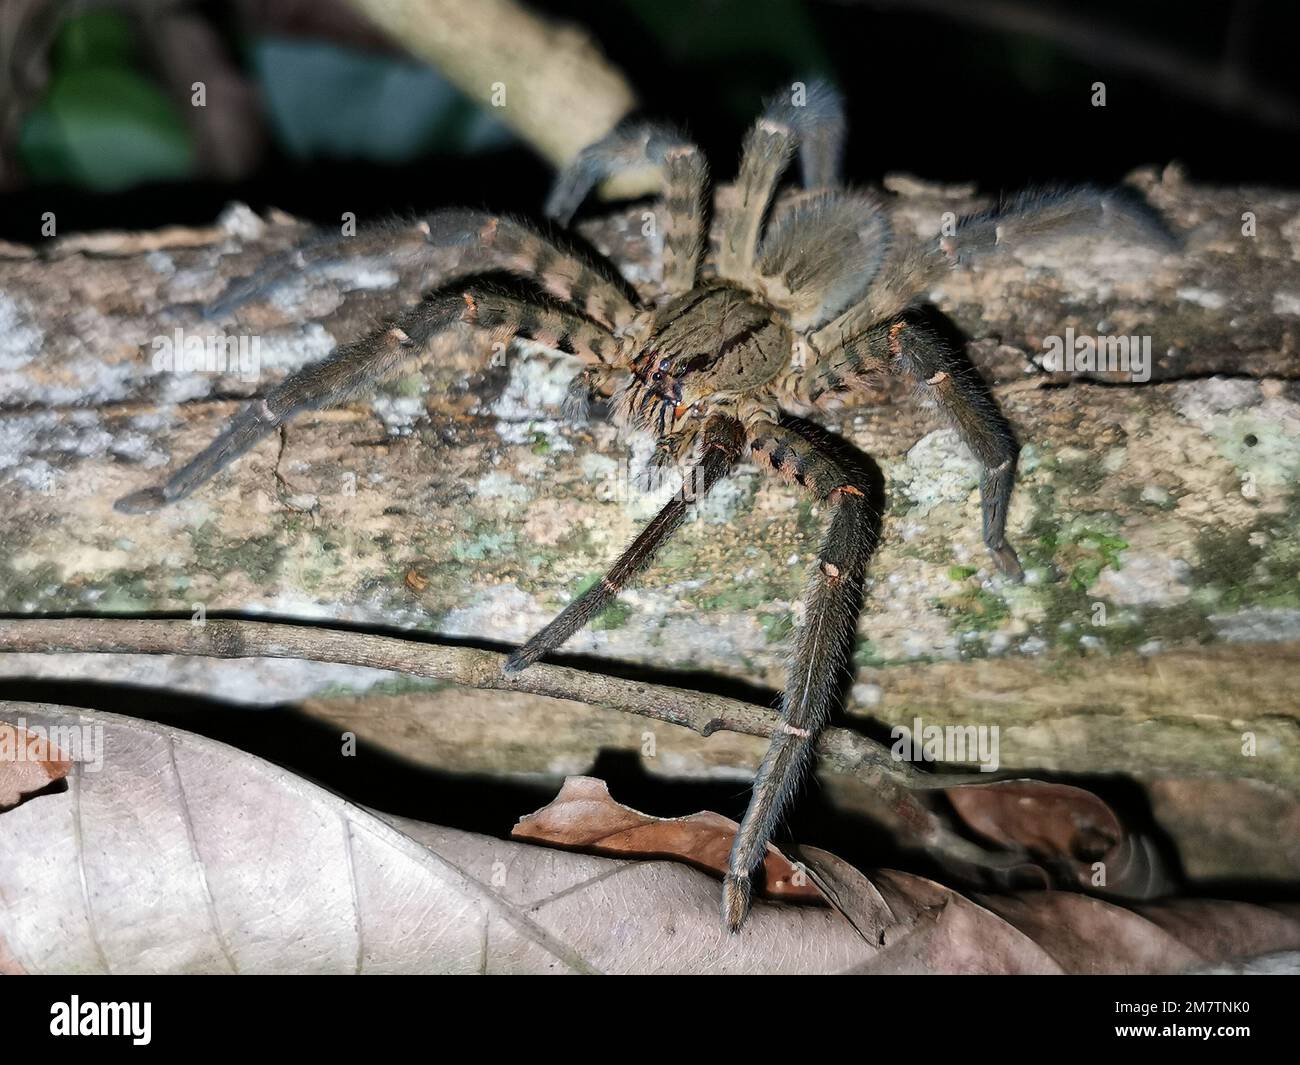 A close-up of a tiger bromeliad spider on a tree log Stock Photo